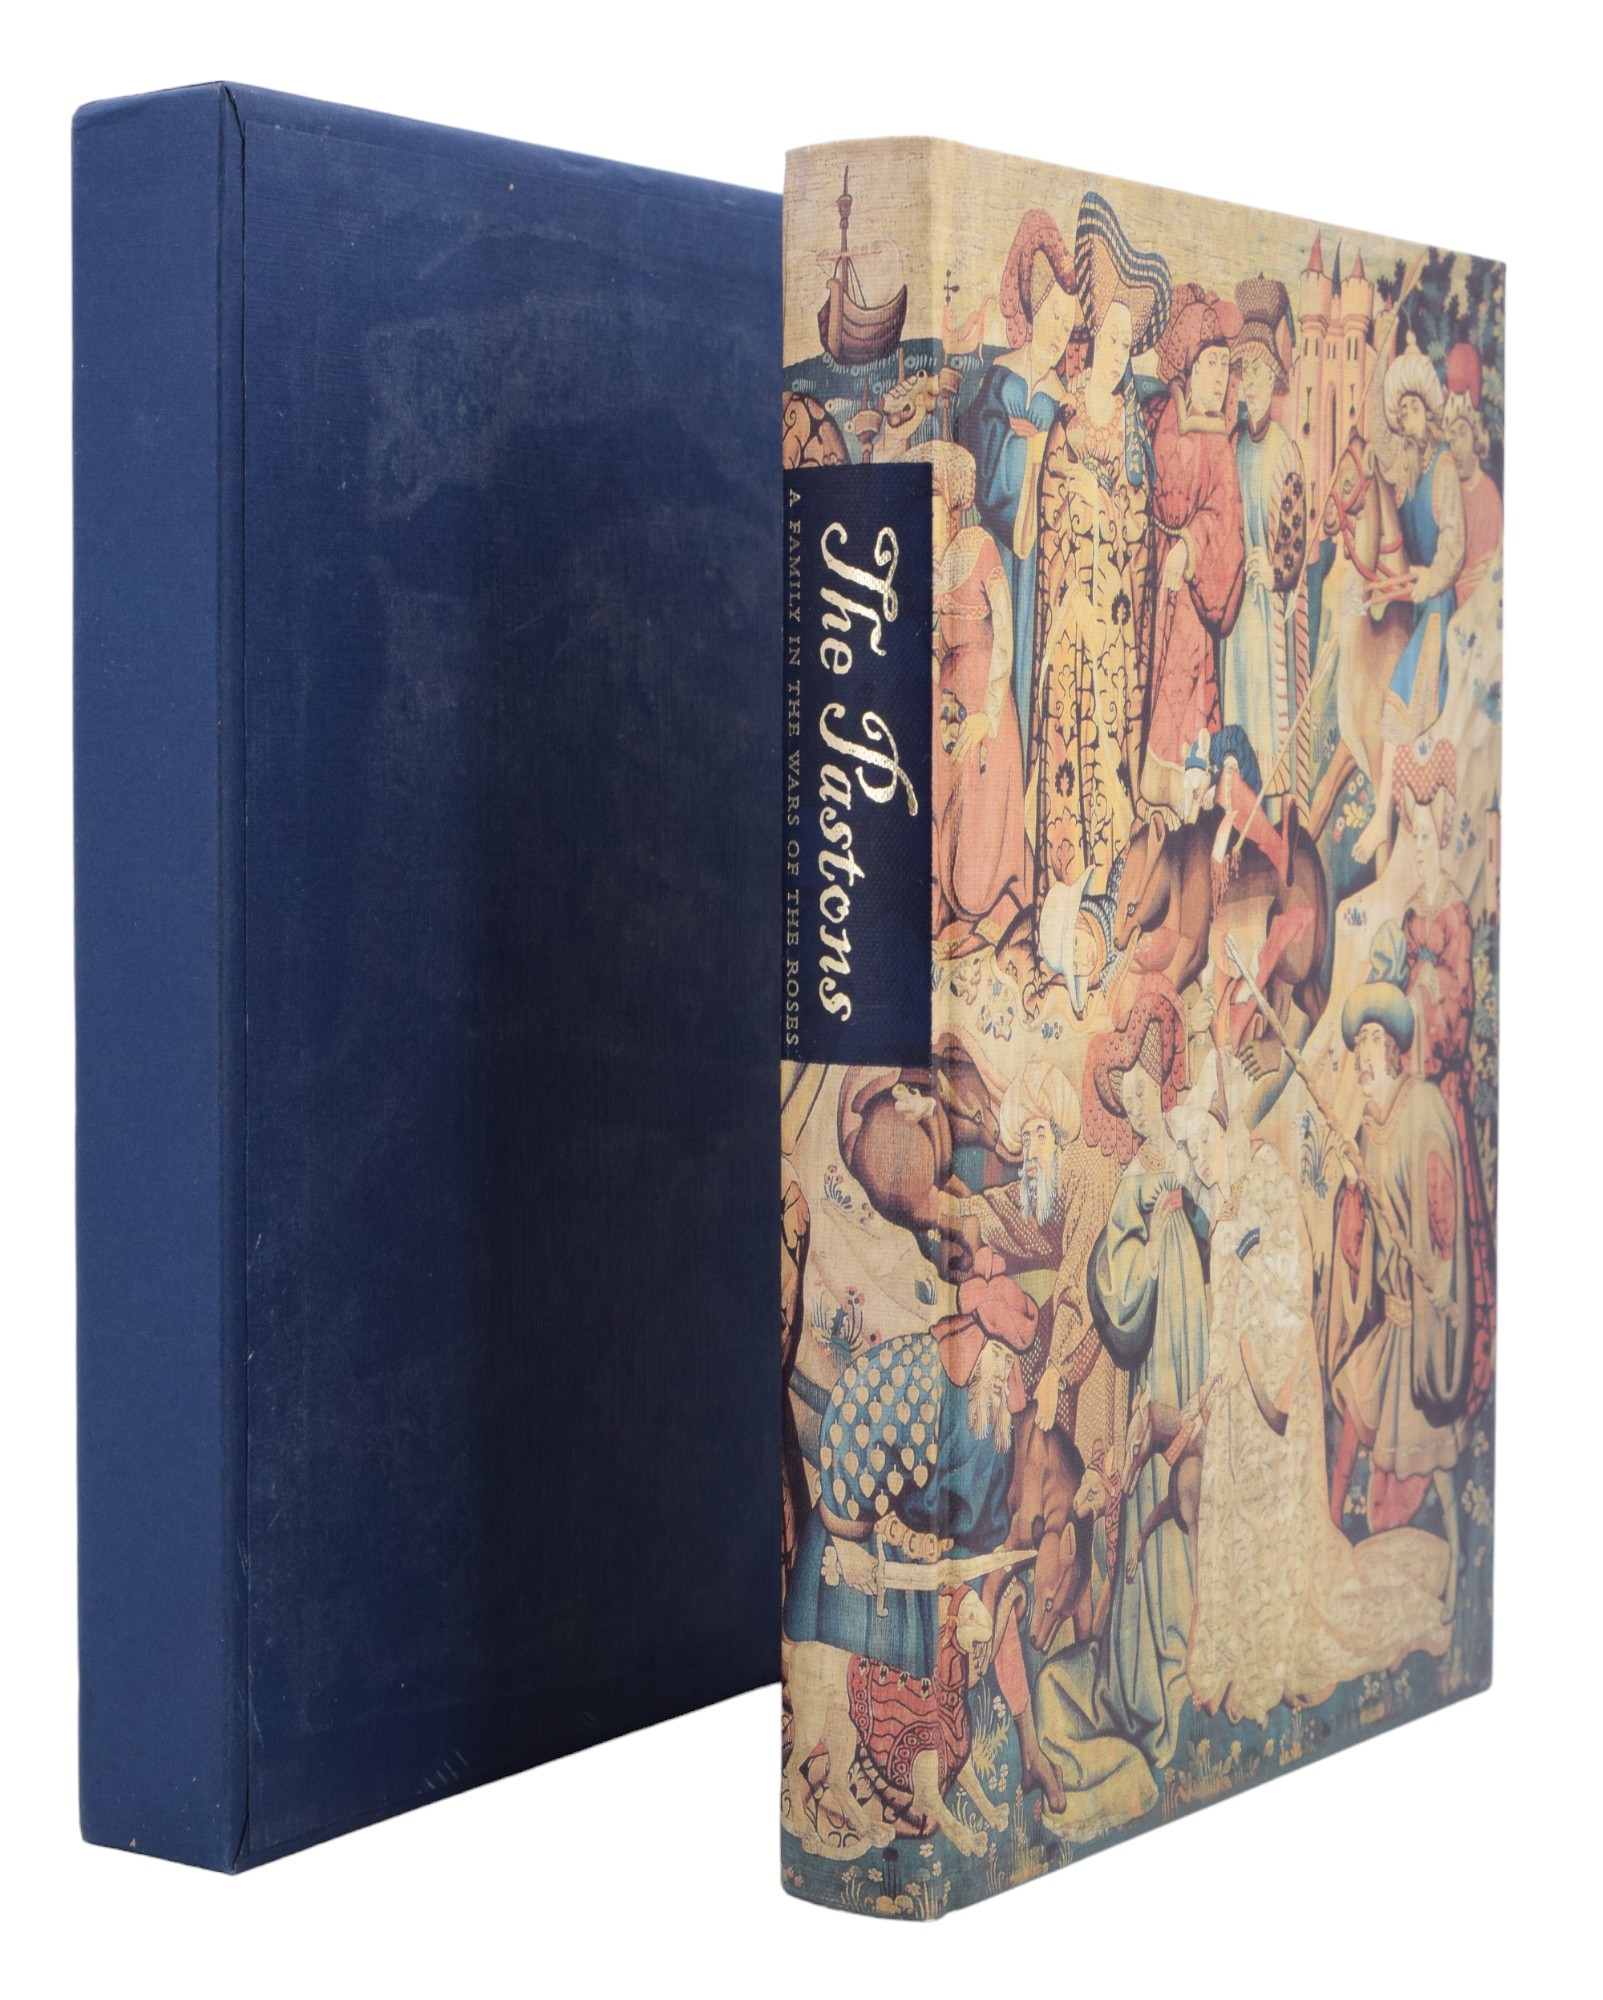 Seven Folio Society publications in slip cases, including Frances Wood, "The Silk Road", 2002; - Image 2 of 31